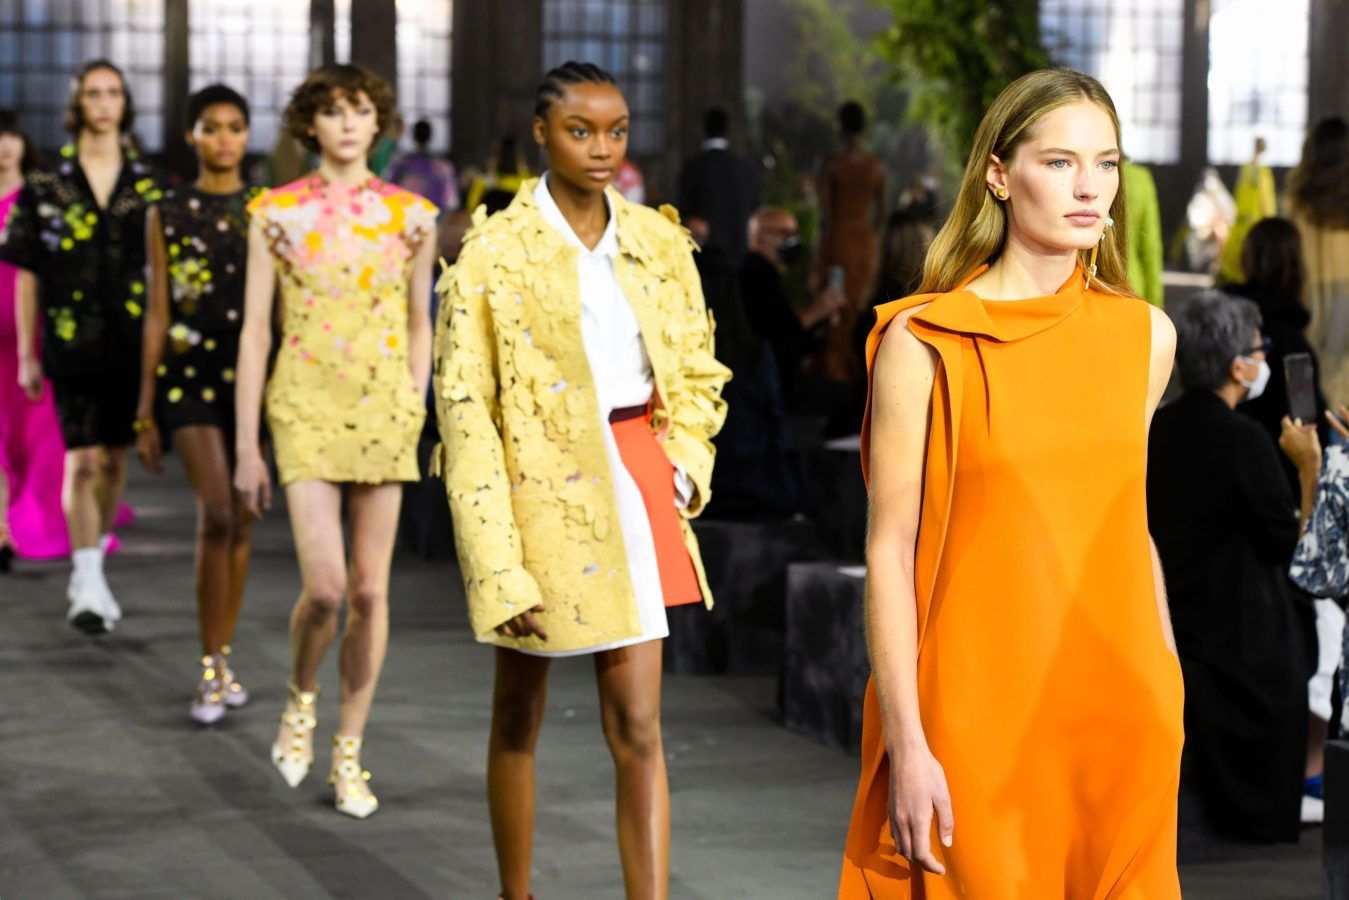 Milan Fashion Week: Trends That Reigned on the Runway